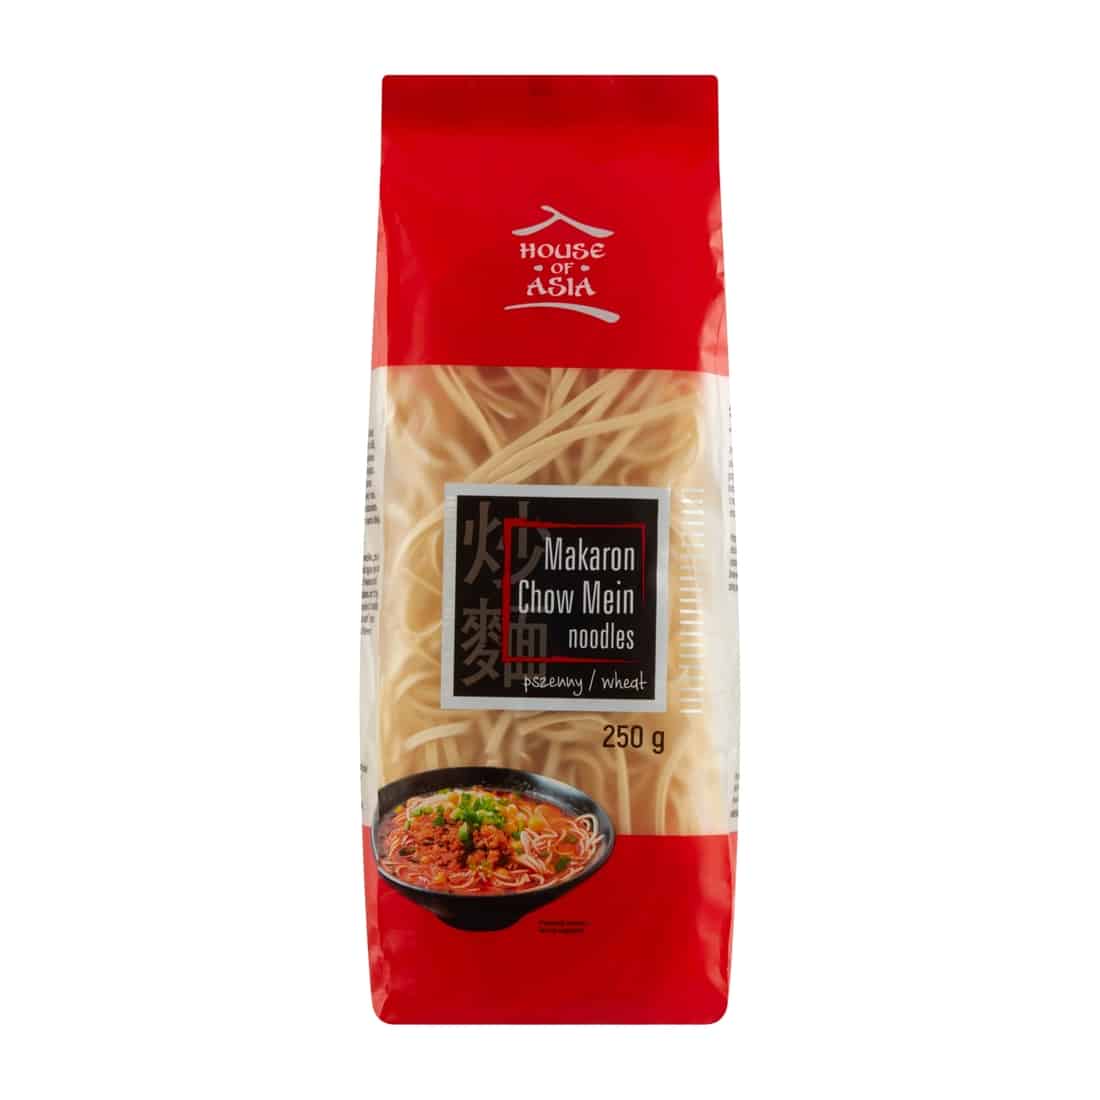 Makaron Chow Mein 250g House of Asia